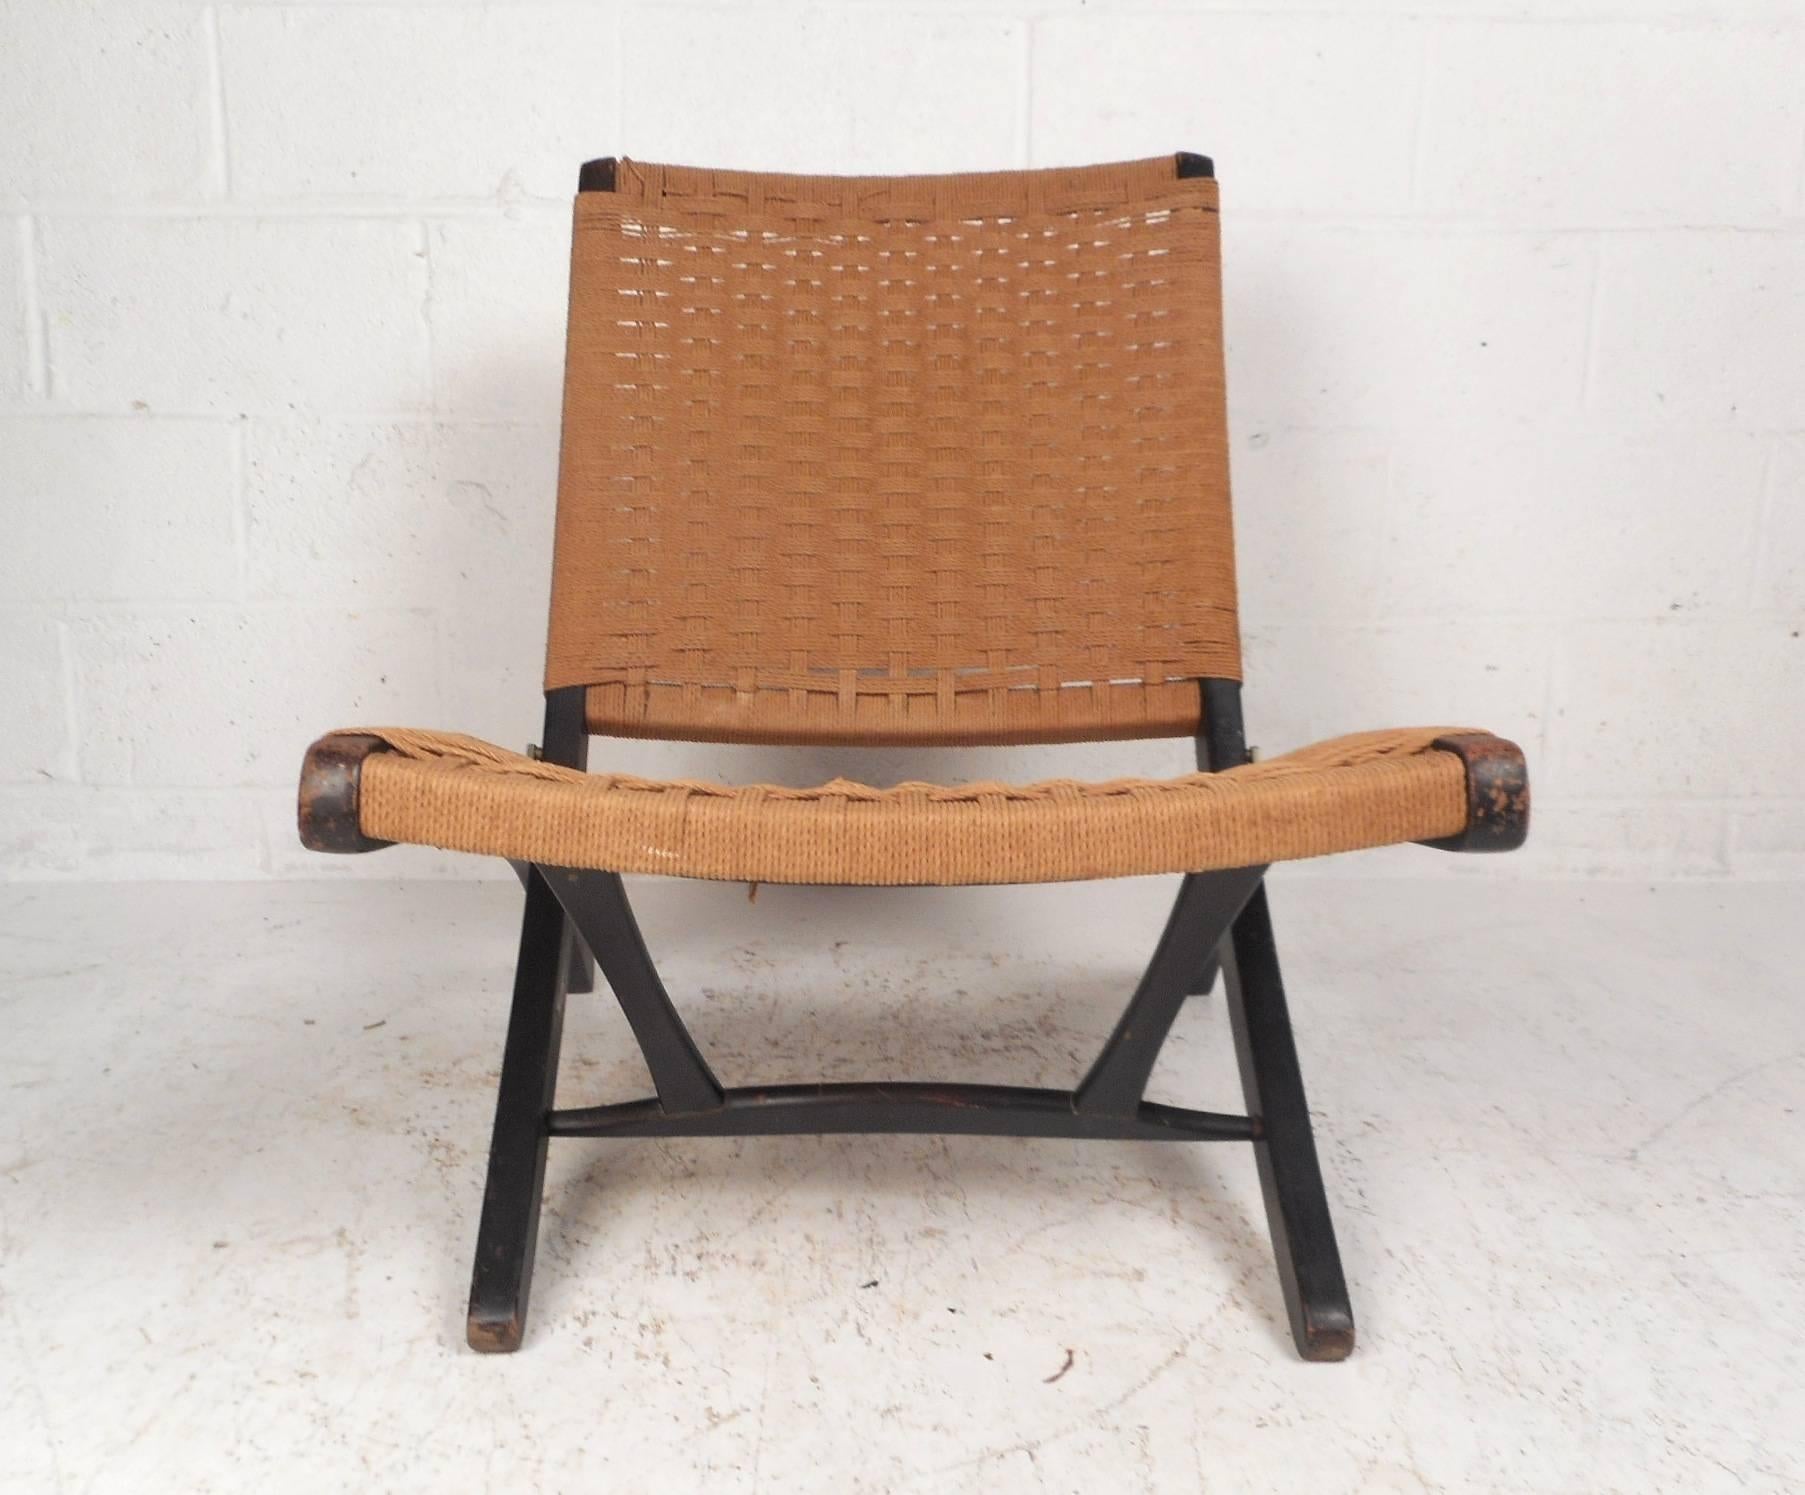 A well made folding slipping chair with a woven seat and backrest. Sleek design with unique 